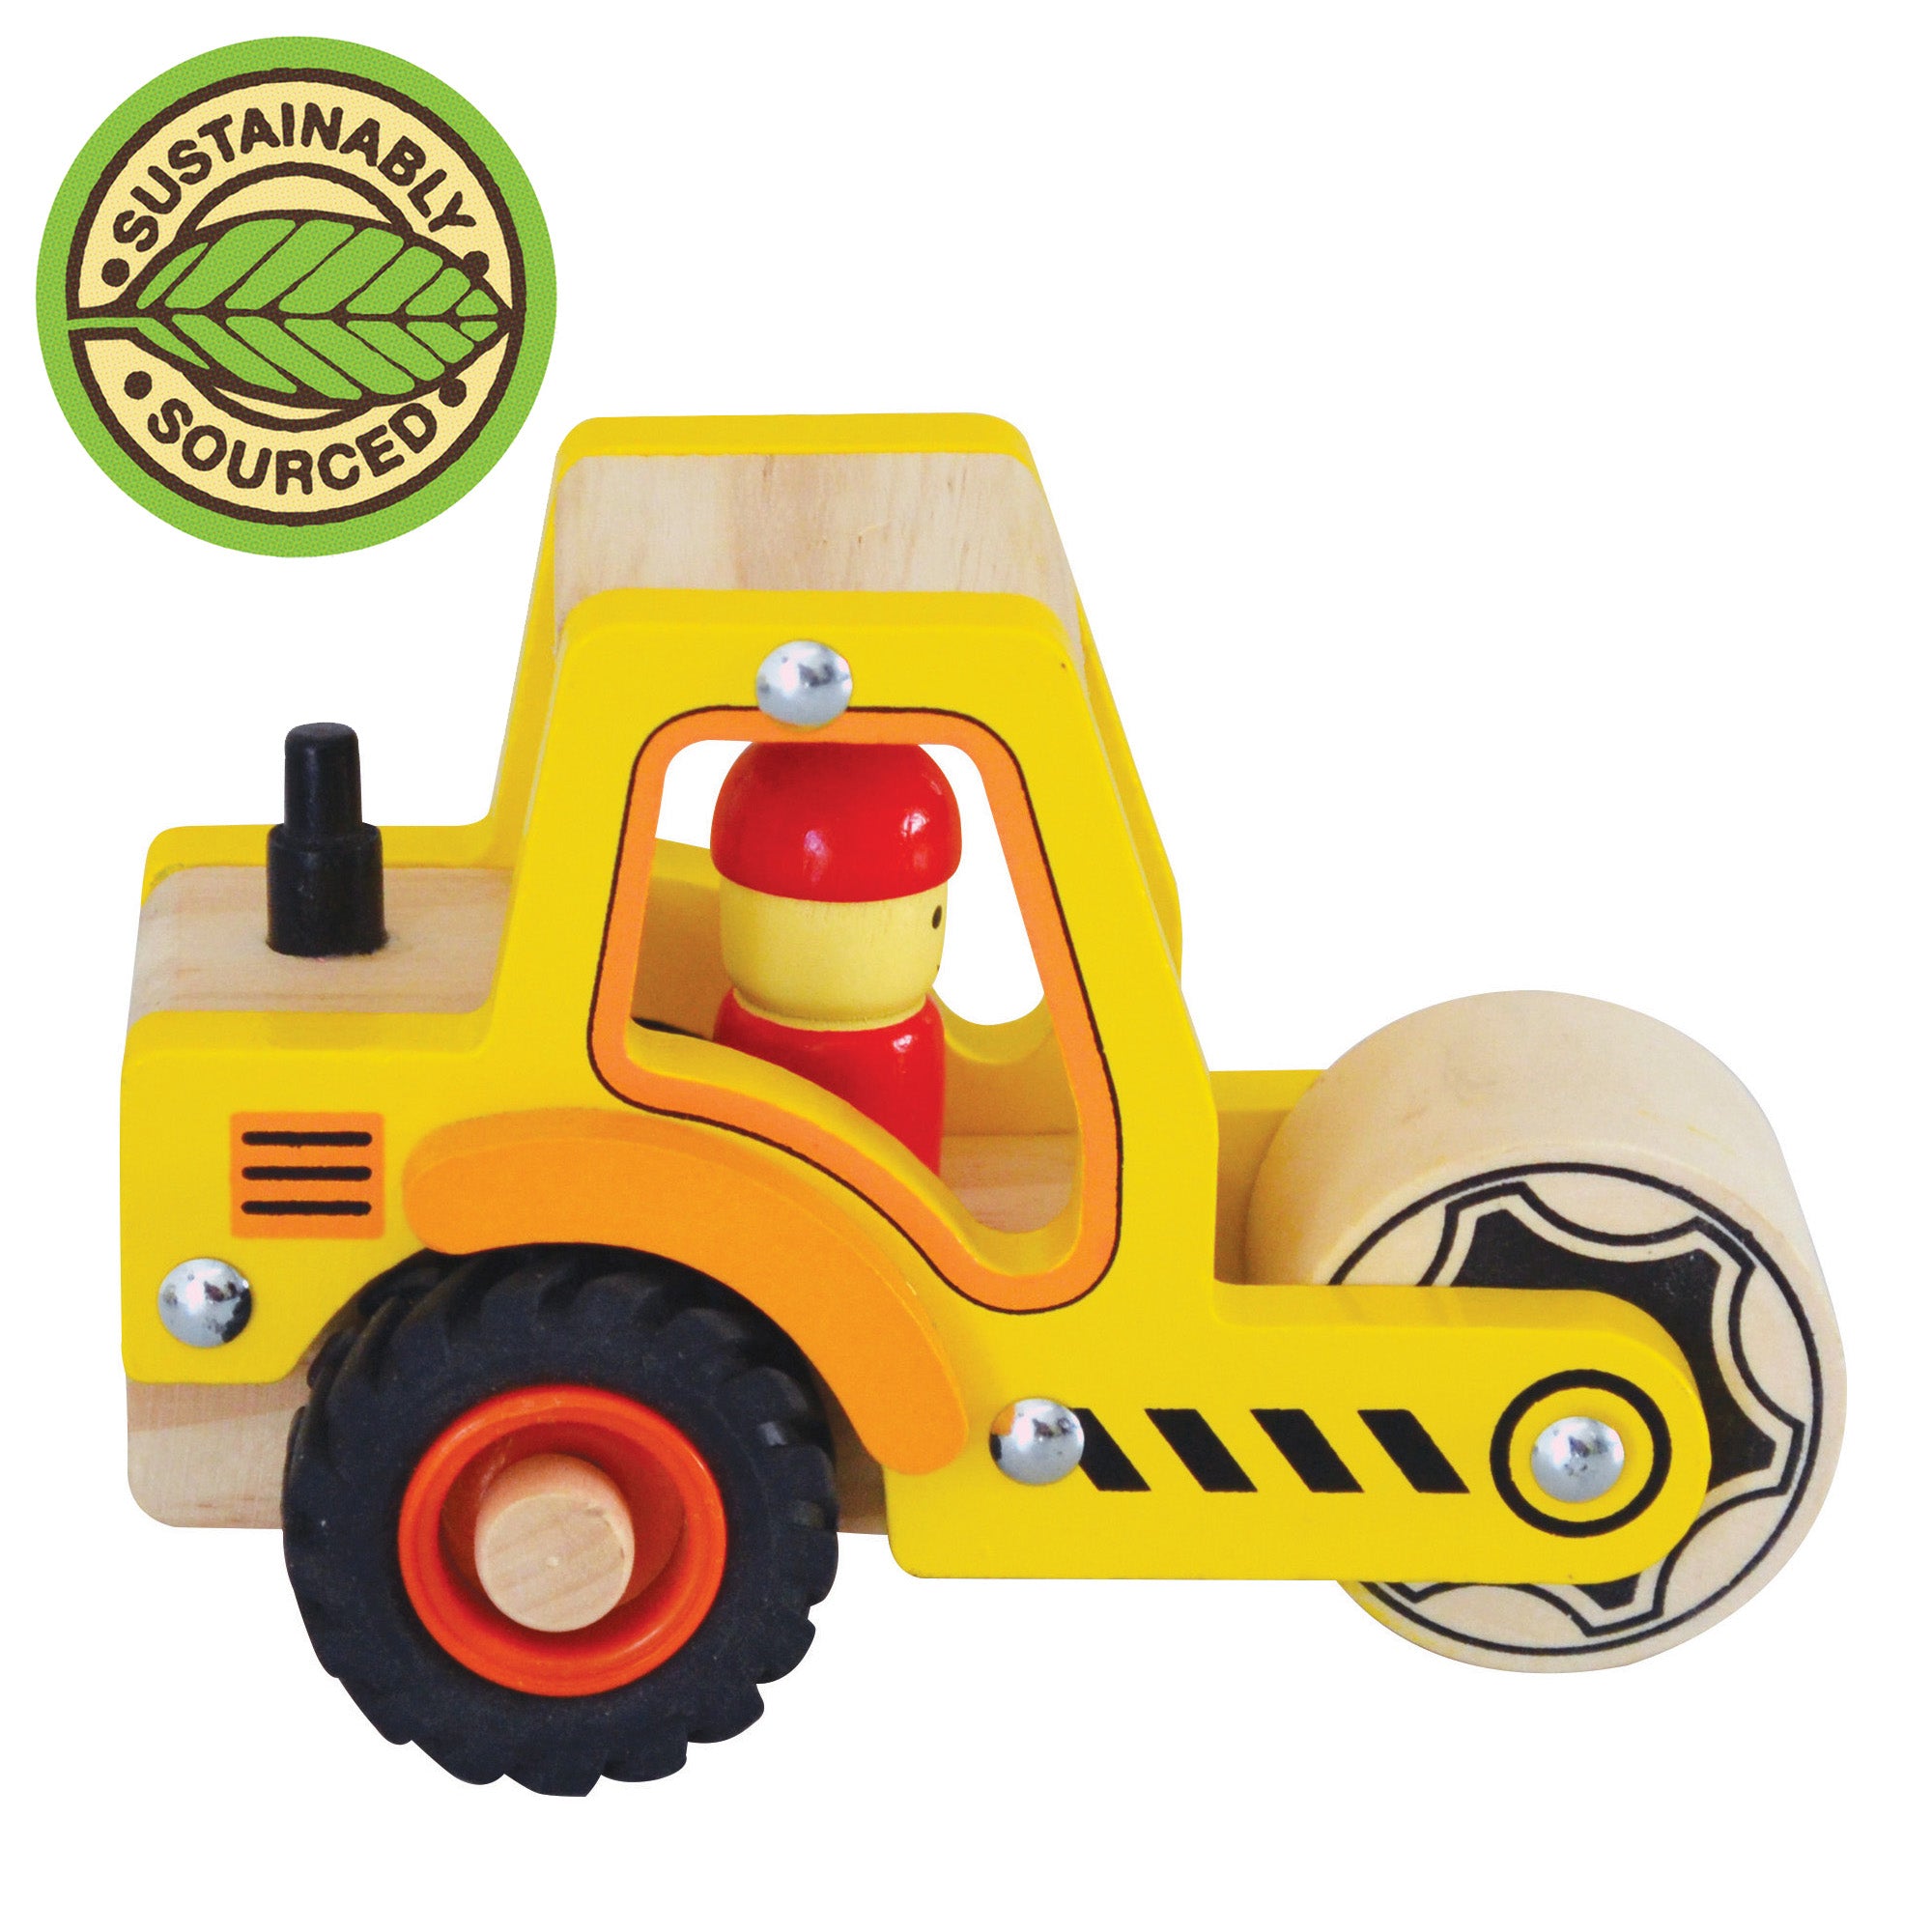 Wooden Construction Vehicle - Road Roller